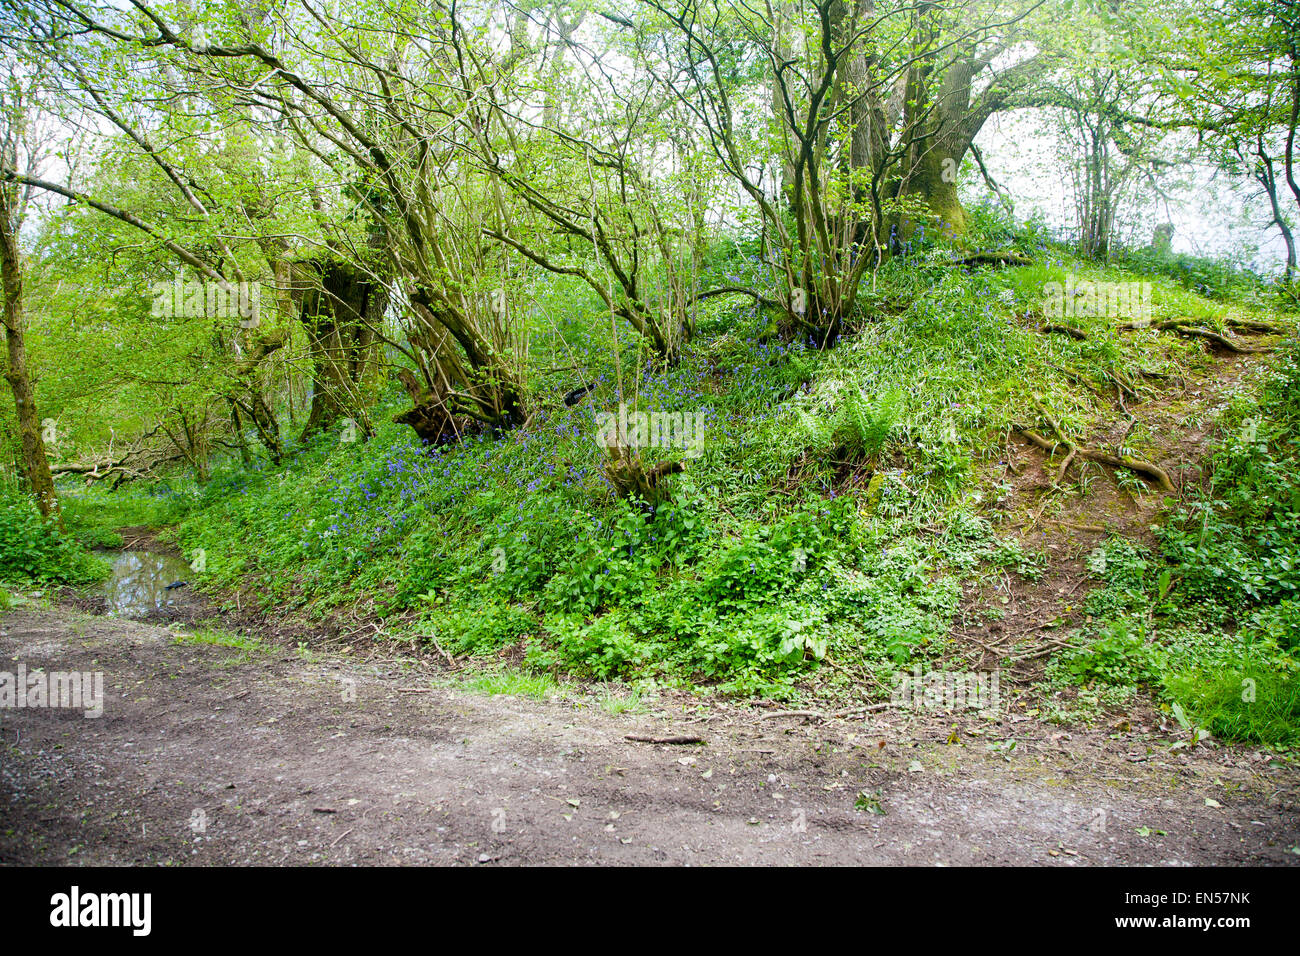 Ditch and embankment of the Wansdyke a Saxon defensive structure on All Cannings chalk downs near Tan Hill, Wiltshire, England Stock Photo